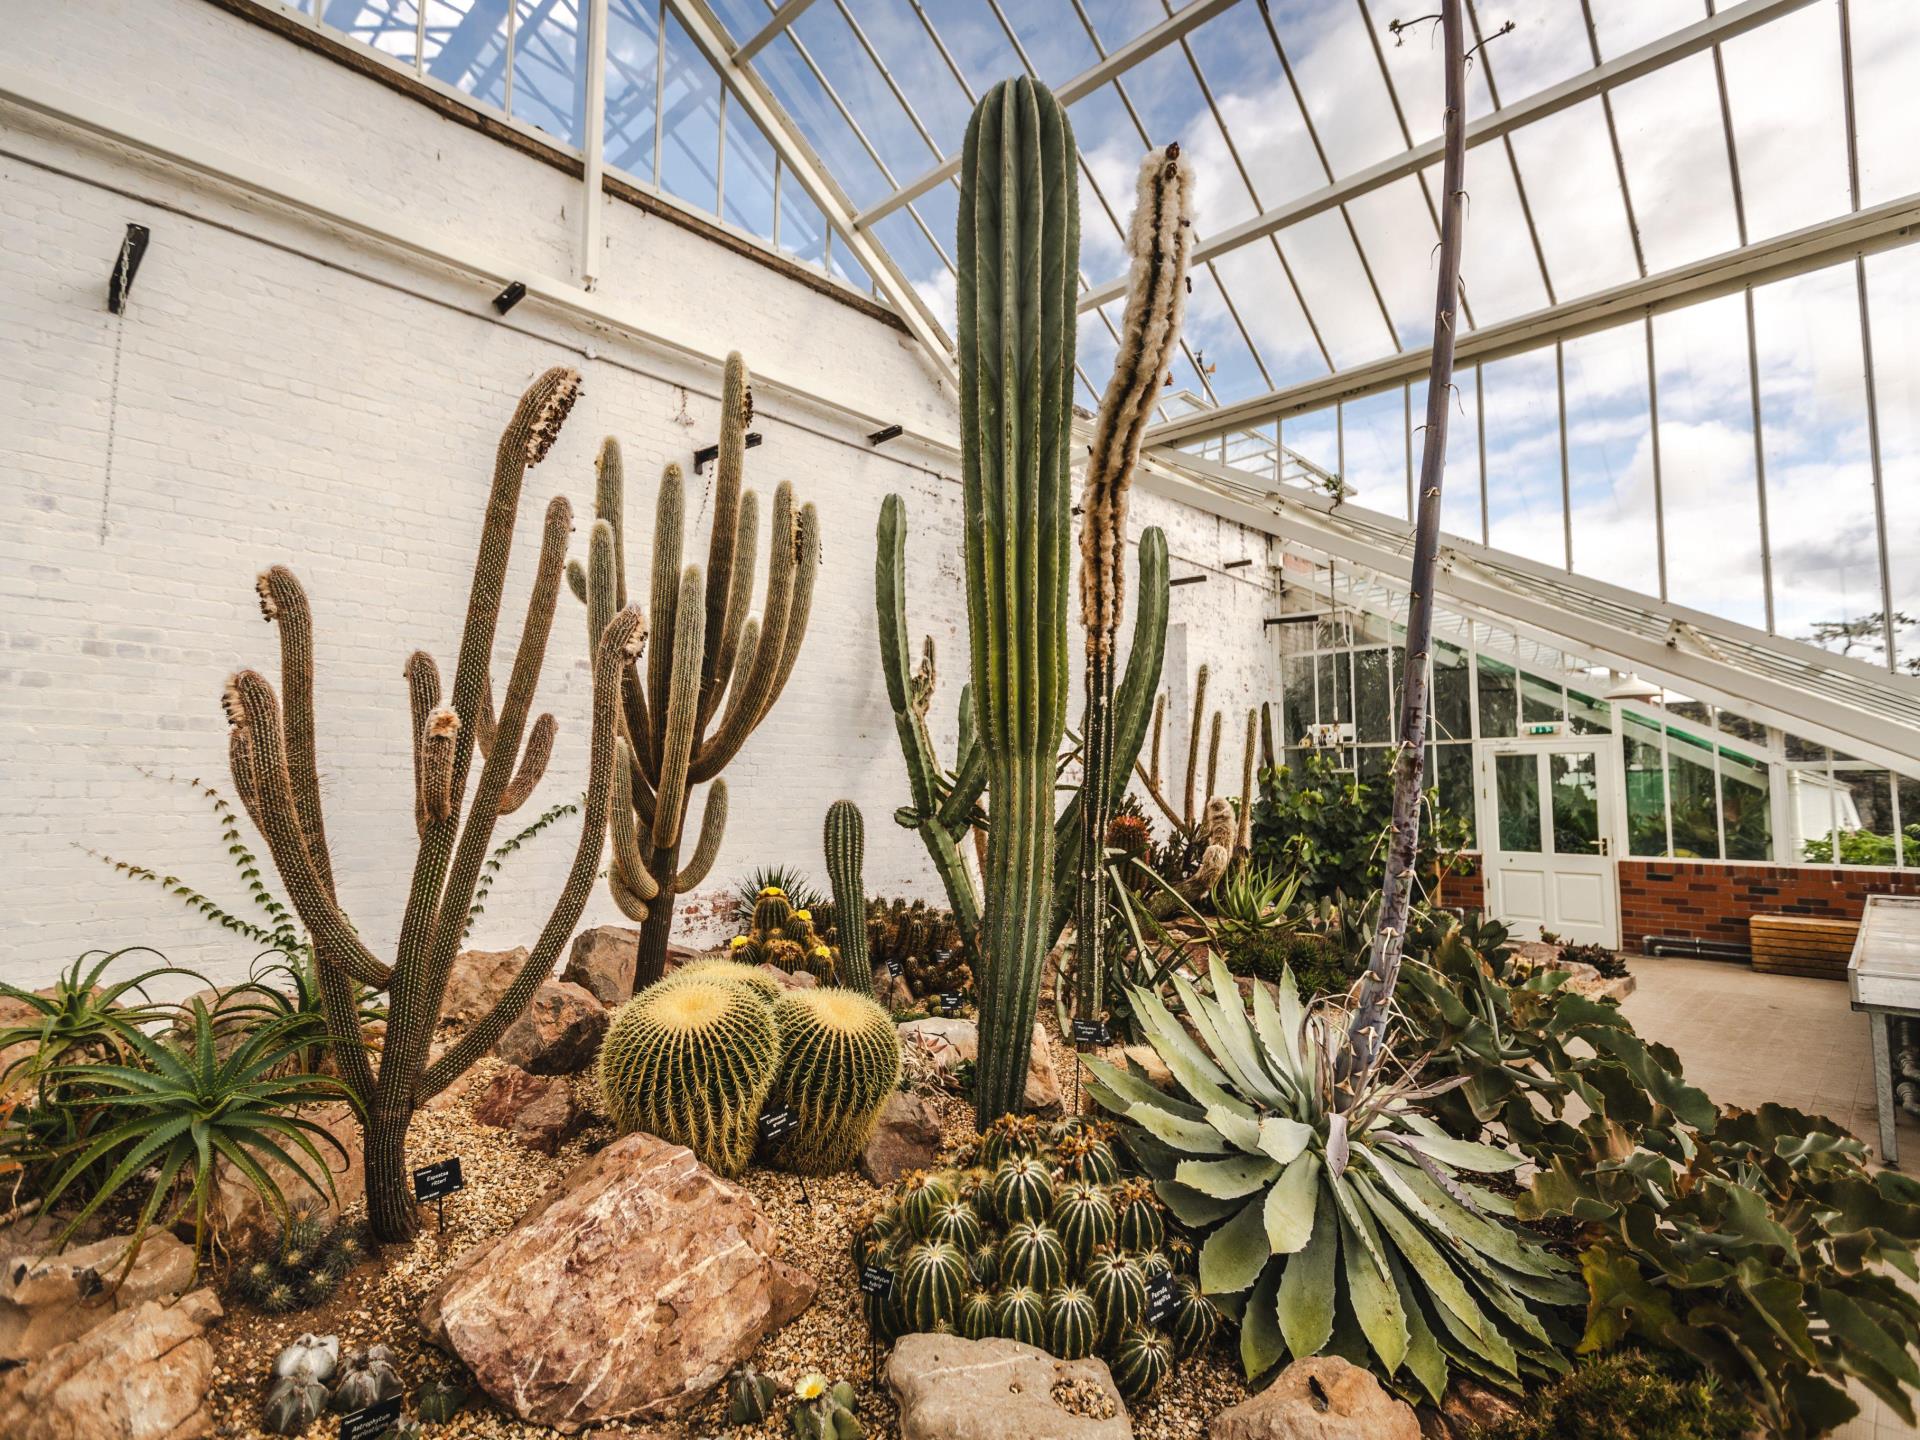 The Cacti Collection at Dyffryn Gardens